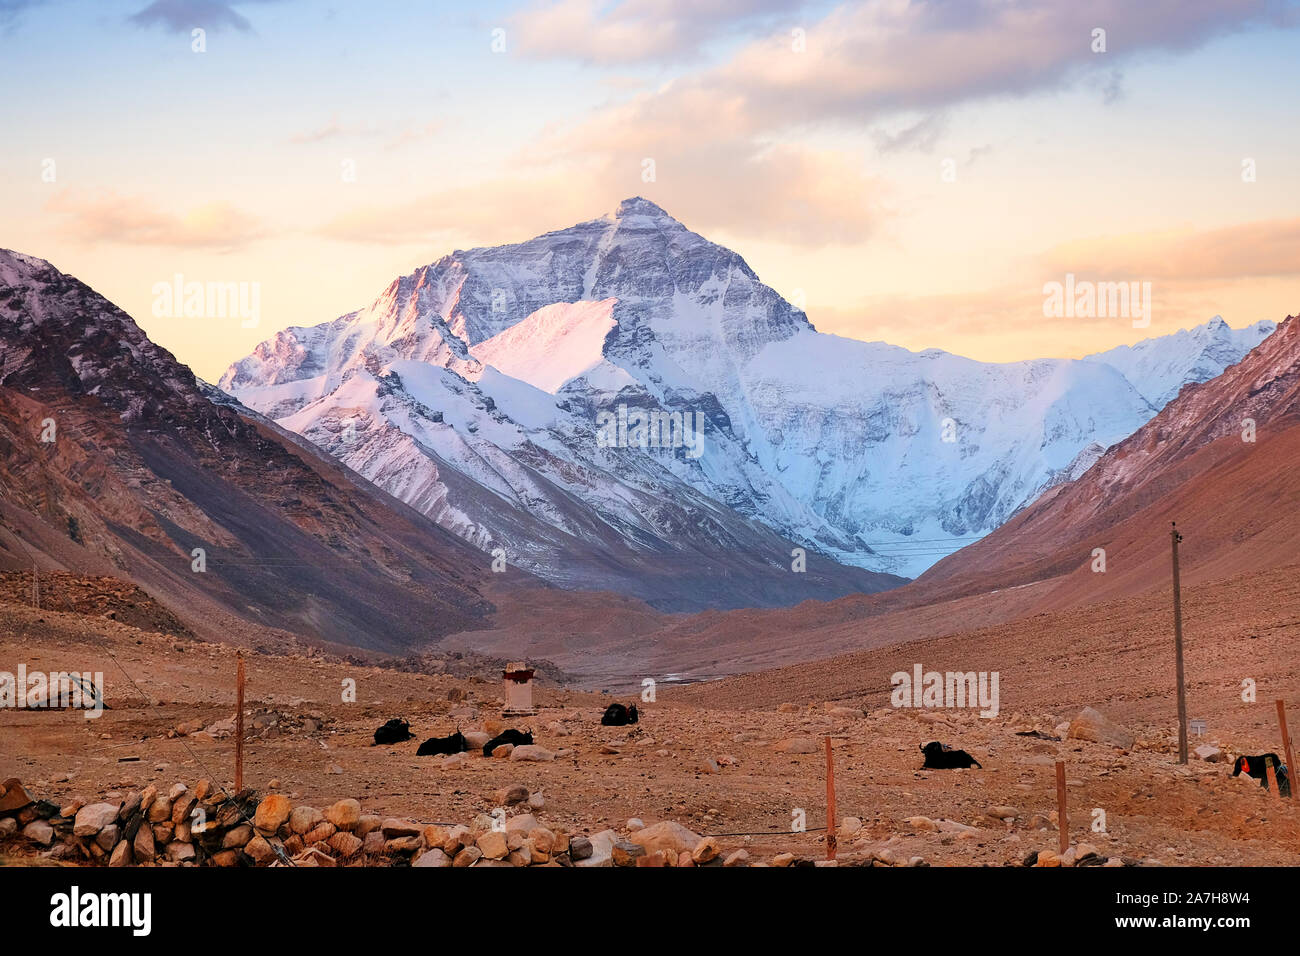 Yaks in the Tibetan plateau in a brown valley surrounding Mount Everest, against a warm colorful morning sky. Stock Photo